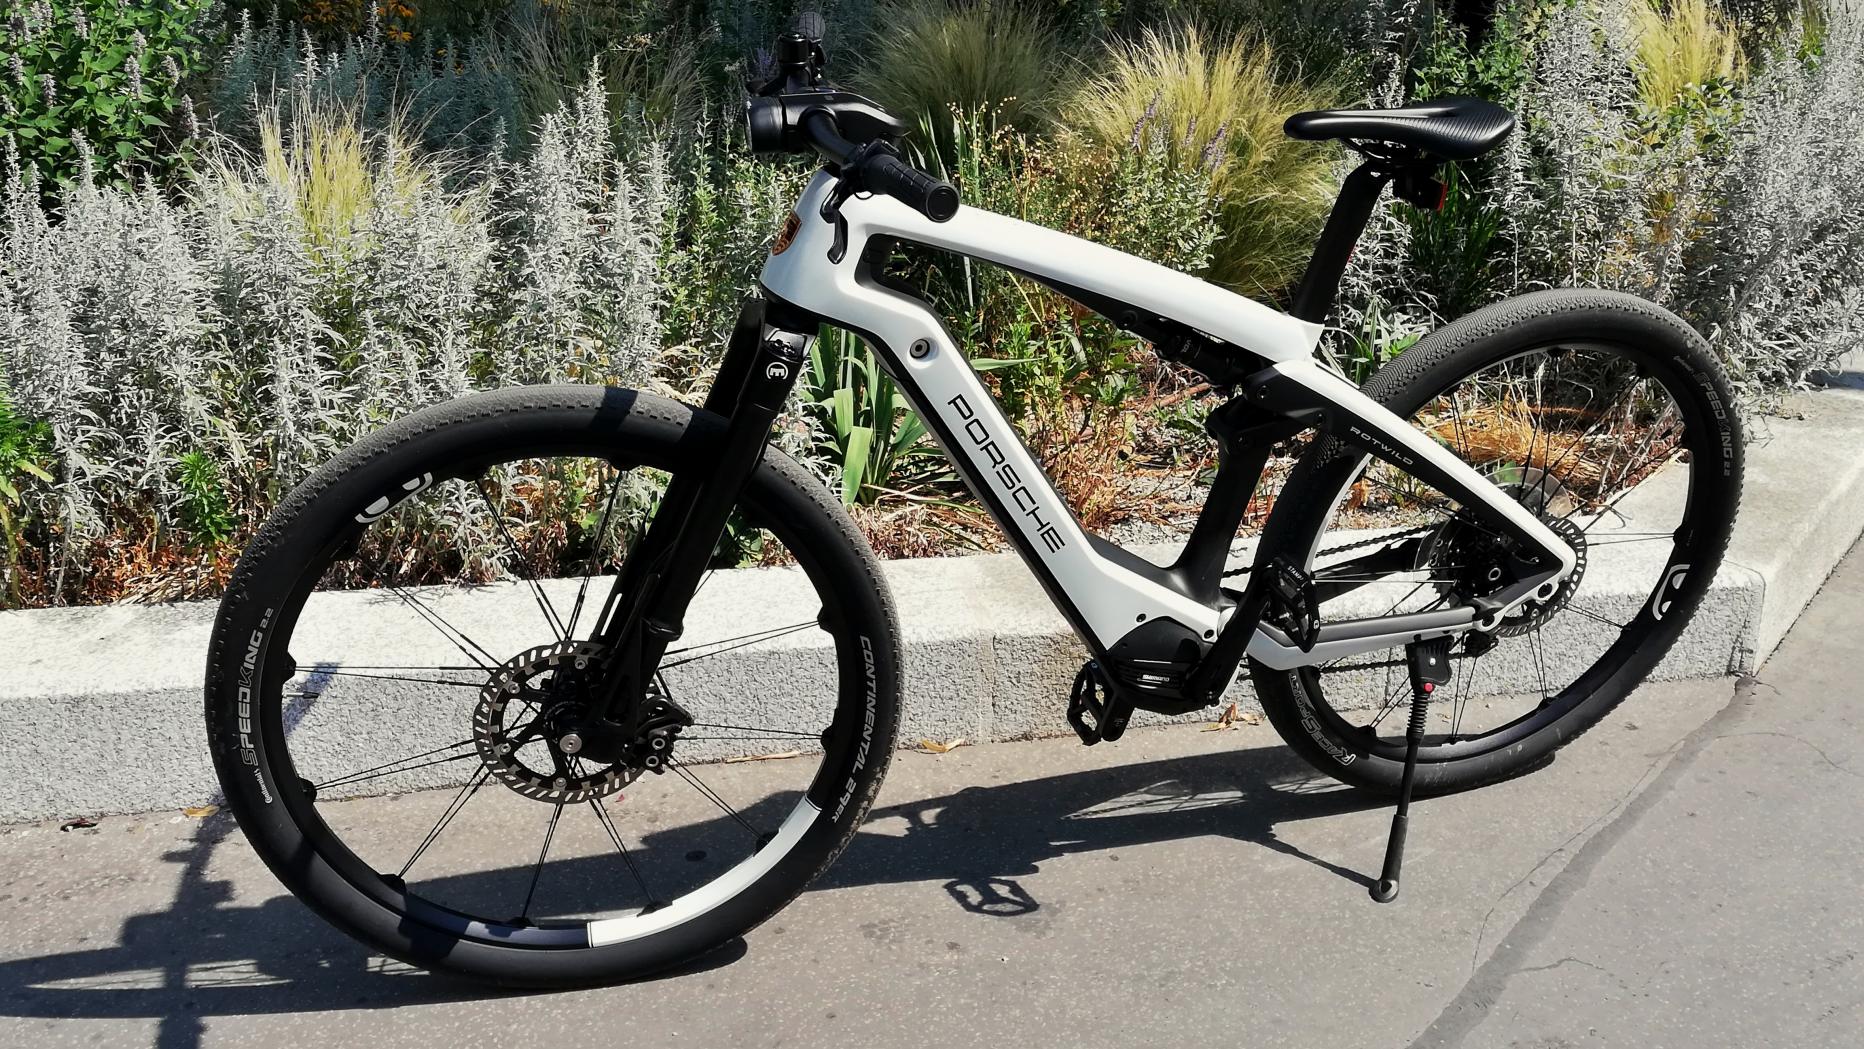 stapel Rennen Hijsen Porsche Seeks to Lead Micromobility with Electric Bicycle Technology  Offering - Latam Mobility